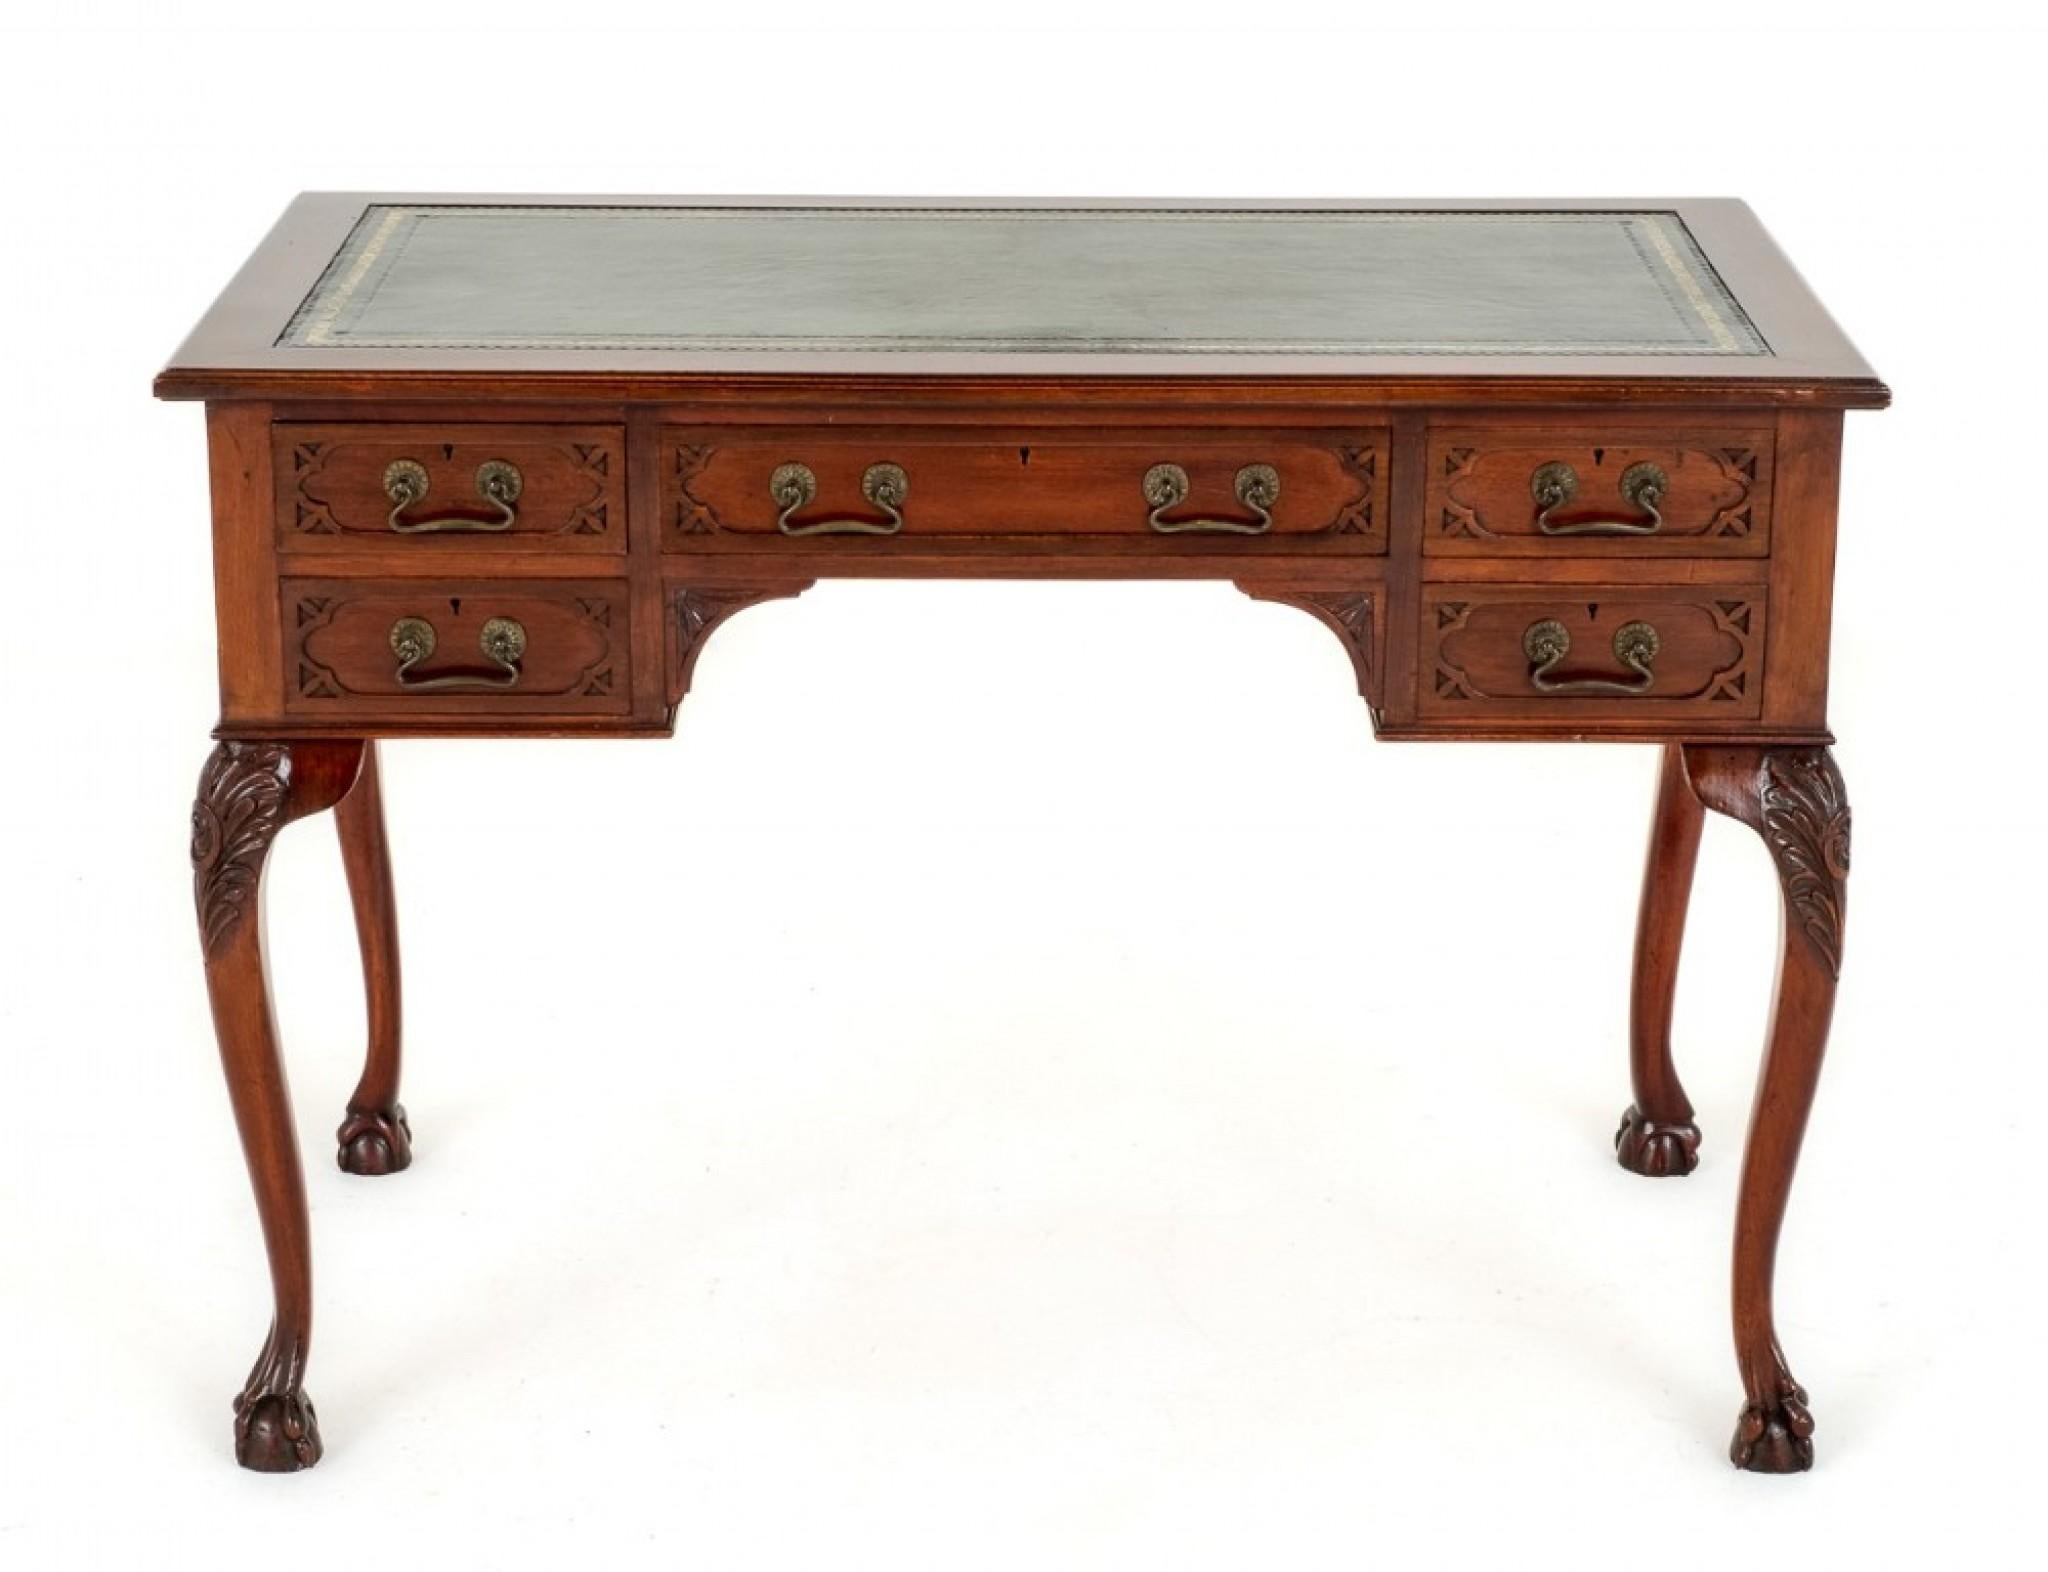 5 Drawer Mahogany Chippendale Style Writing Table.
Circa 1900
This Writing Table Features 5 Mahogany Lined drawers.
The Drawer Fronts Having Blind Fret Work to the Corners and Retain their Original Brass Swan Neck Handles.
The Writing Table is